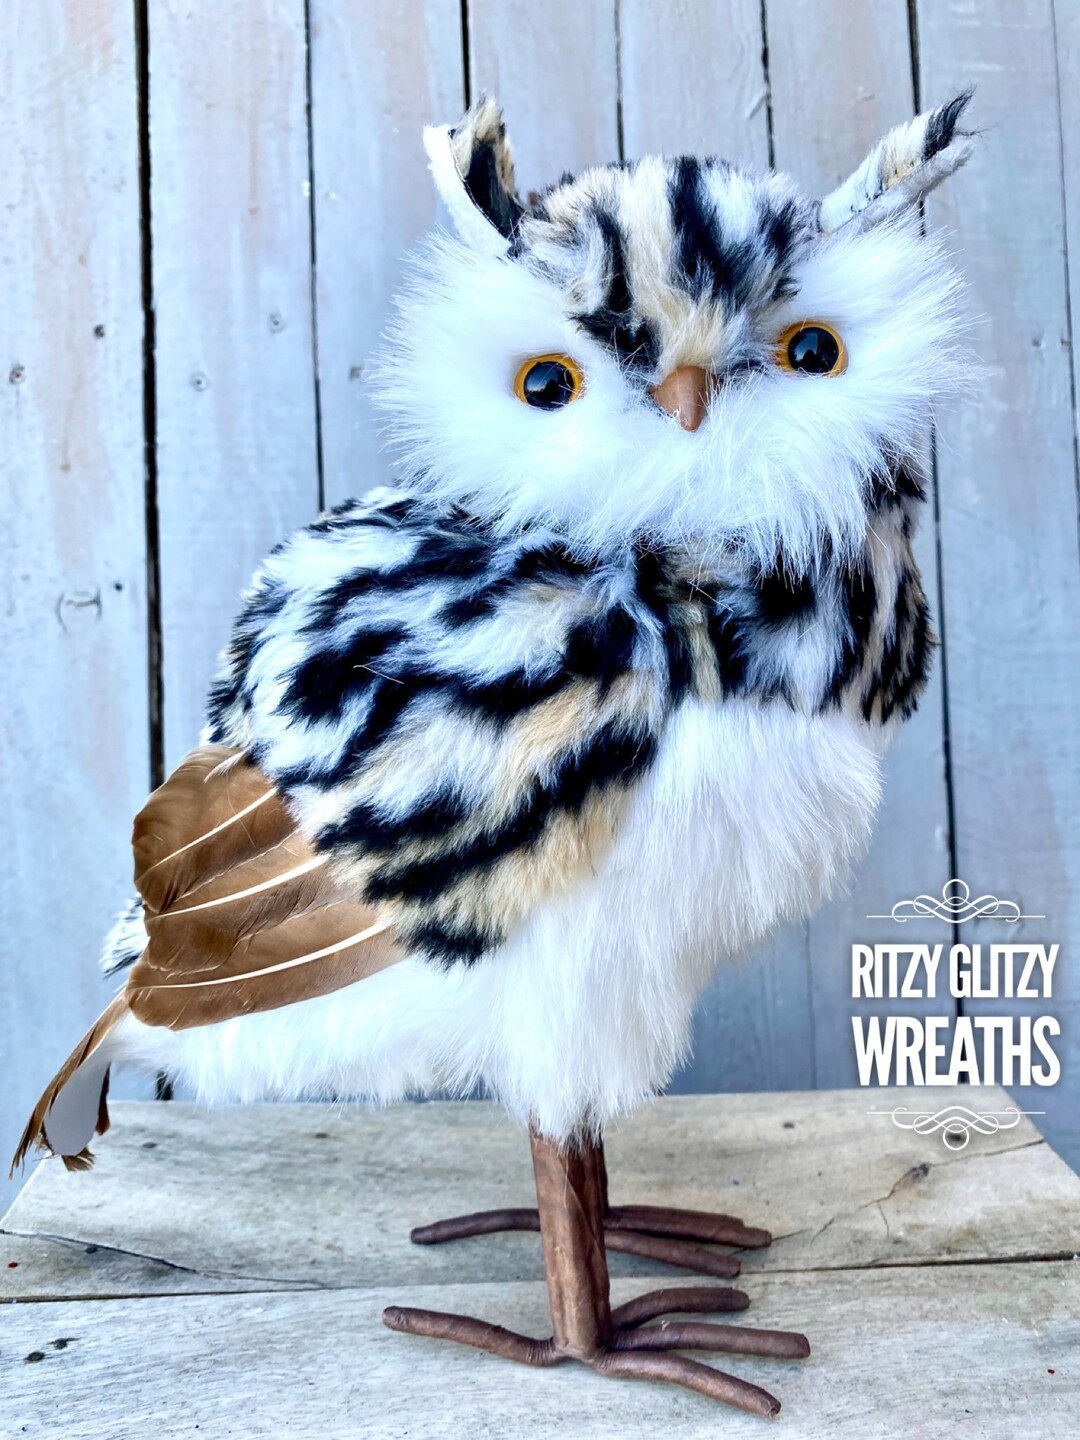 The Spotted Owl - US Designer Ribbon